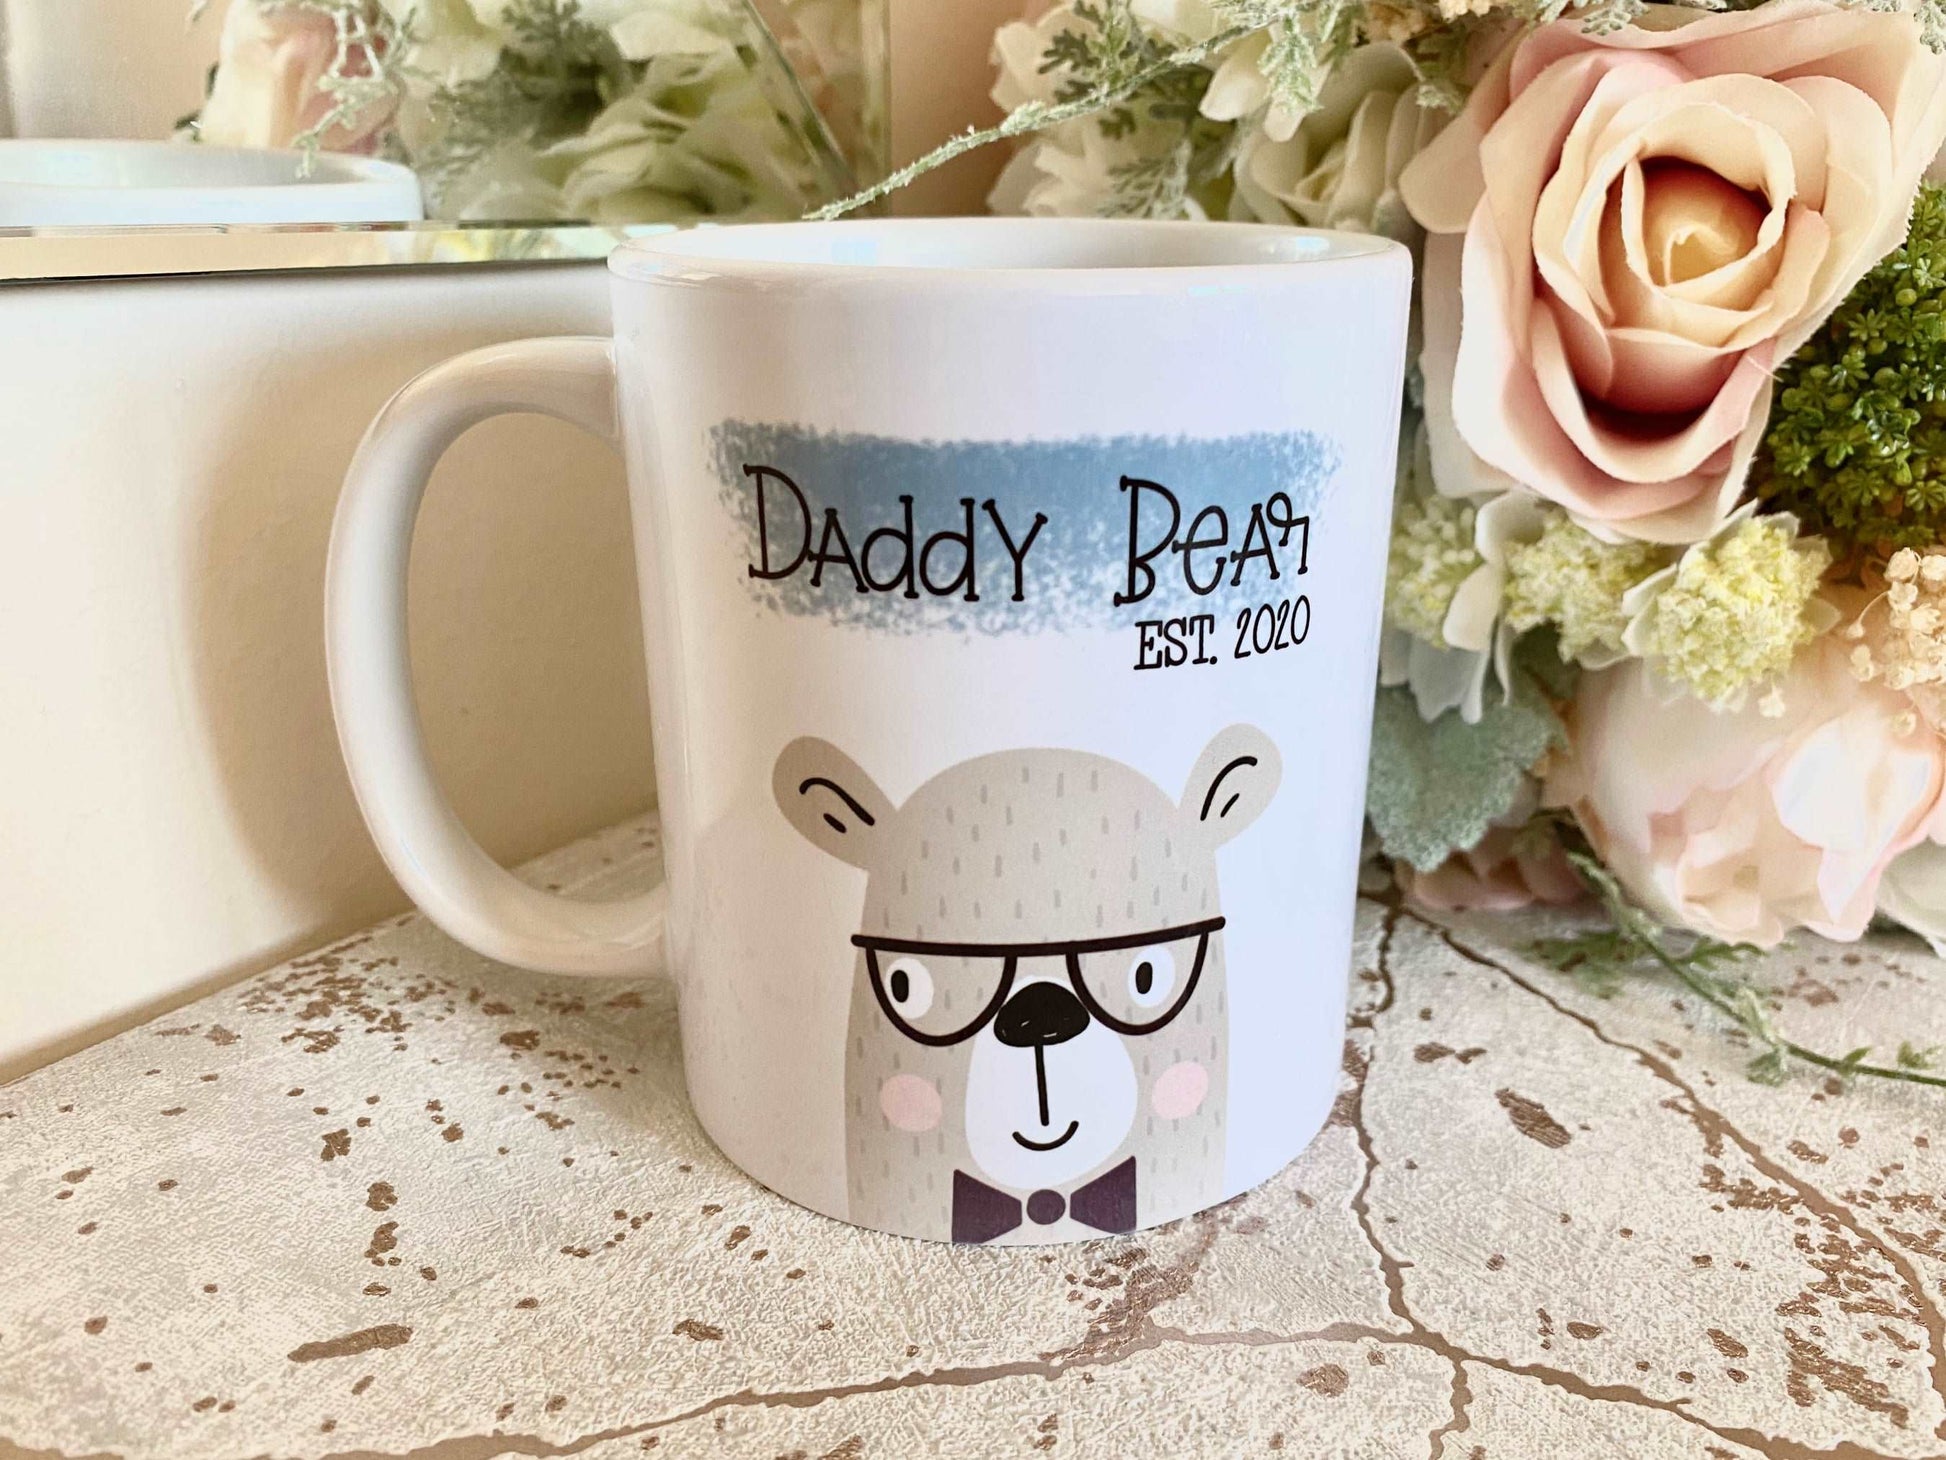 white mug with a bear illustration printed on and the text daddy bear est. 2020 printed over a blue brushdtroke above.